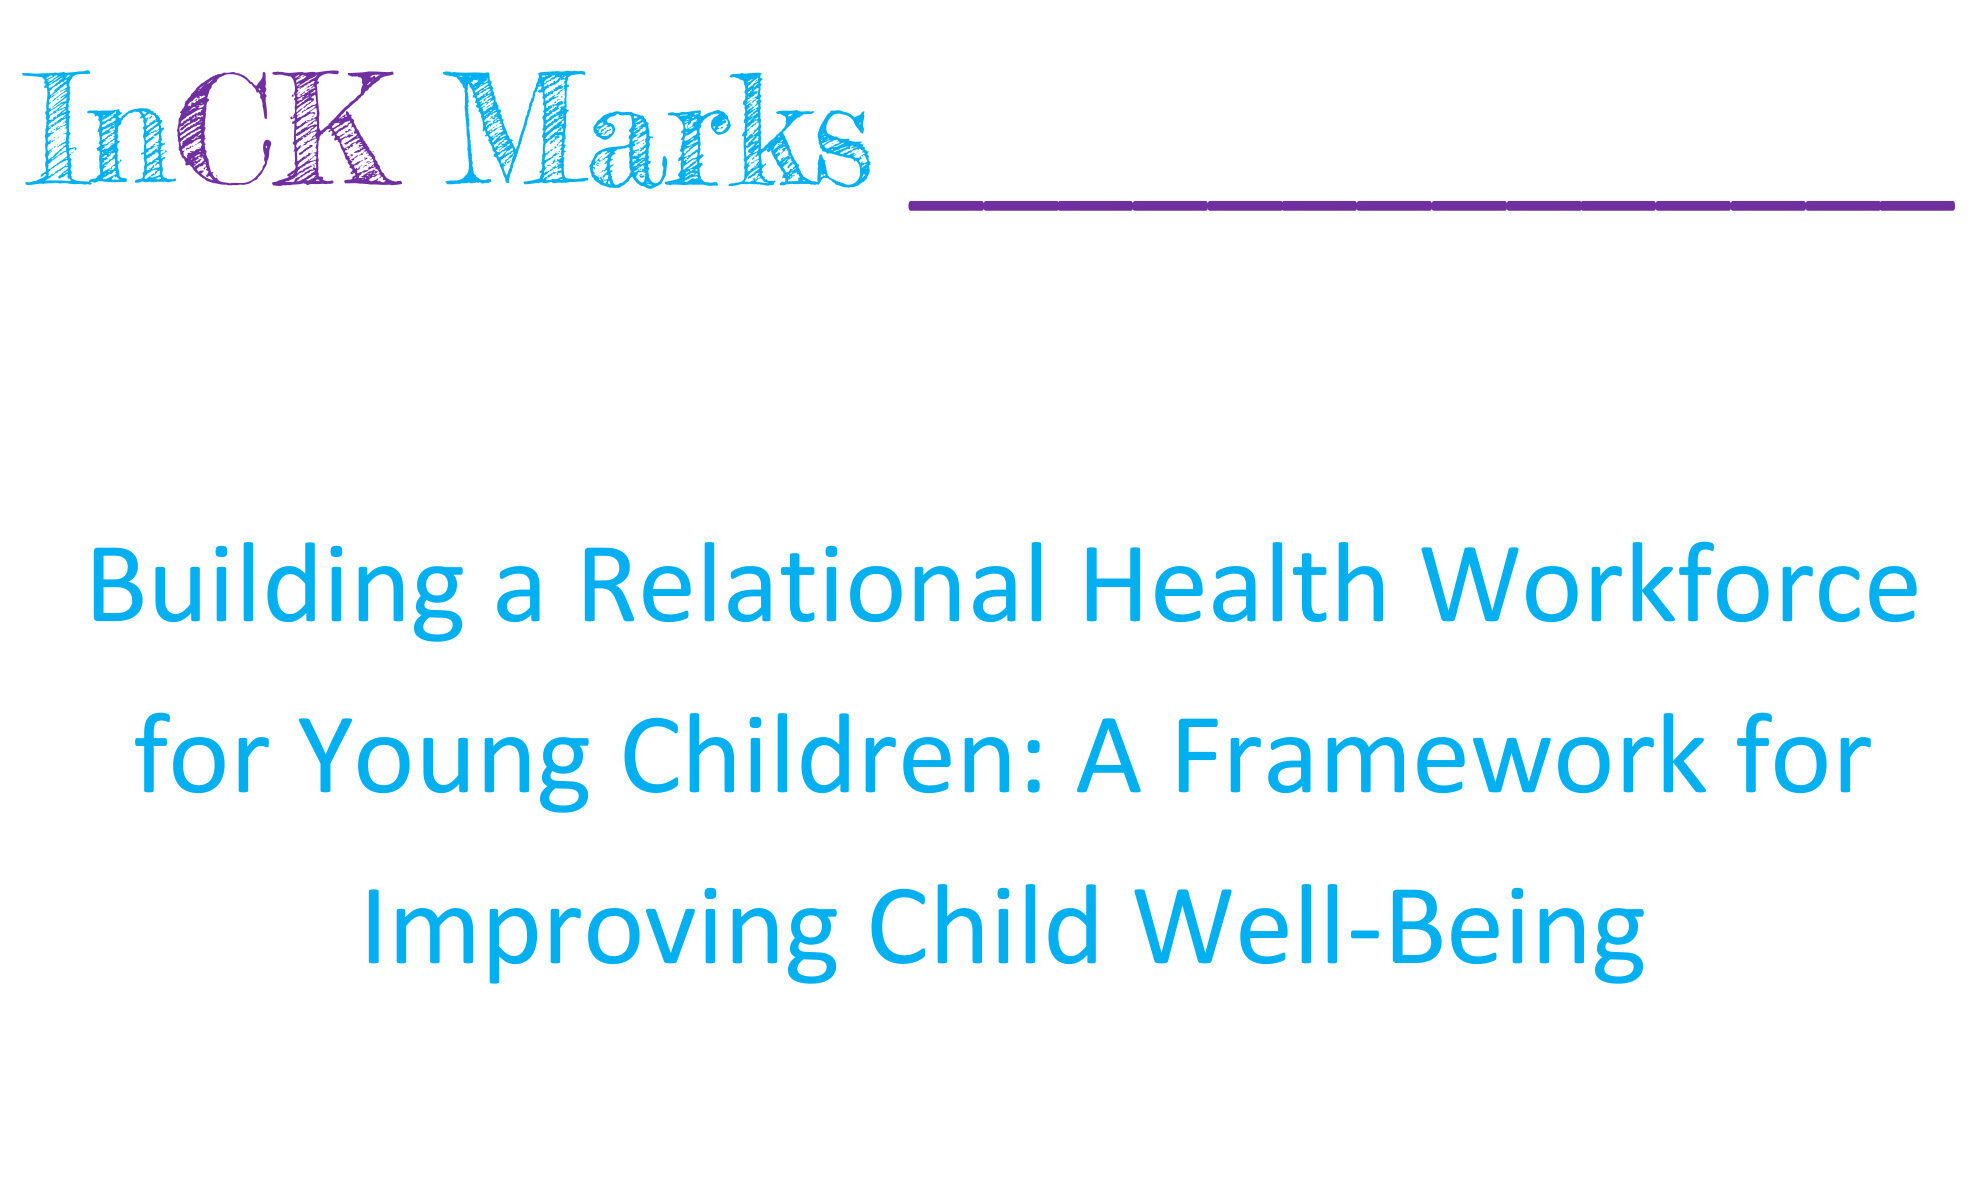 Building A Relational Health Workforce For Young Children A Framework For Improving Child Well Being 1 Scaled Aspect Ratio 820 488